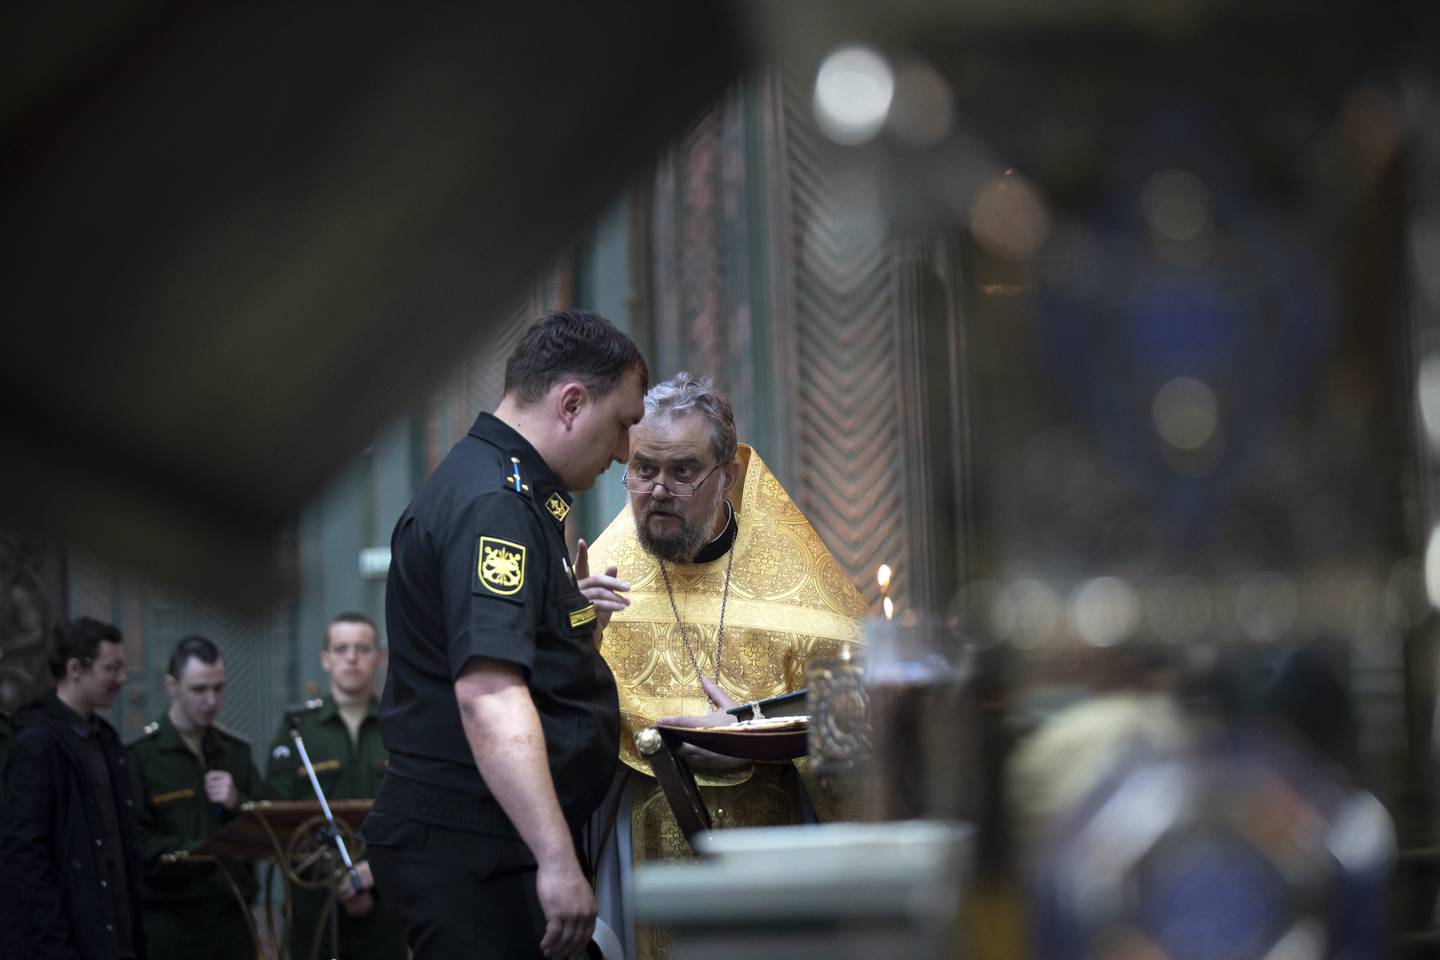 An Orthodox priest speaks to a Russian navy officer at the newly-built main cathedral of the Russian military in the Patriot Park outside in Moscow, Russia, Tuesday, June 23, 2020. The opening of the cathedral that was built in just under 600 days was timed to coincide with the 75th anniversary of the end of World War II in Europe. (AP Photo/Alexander Zemlianichenko)